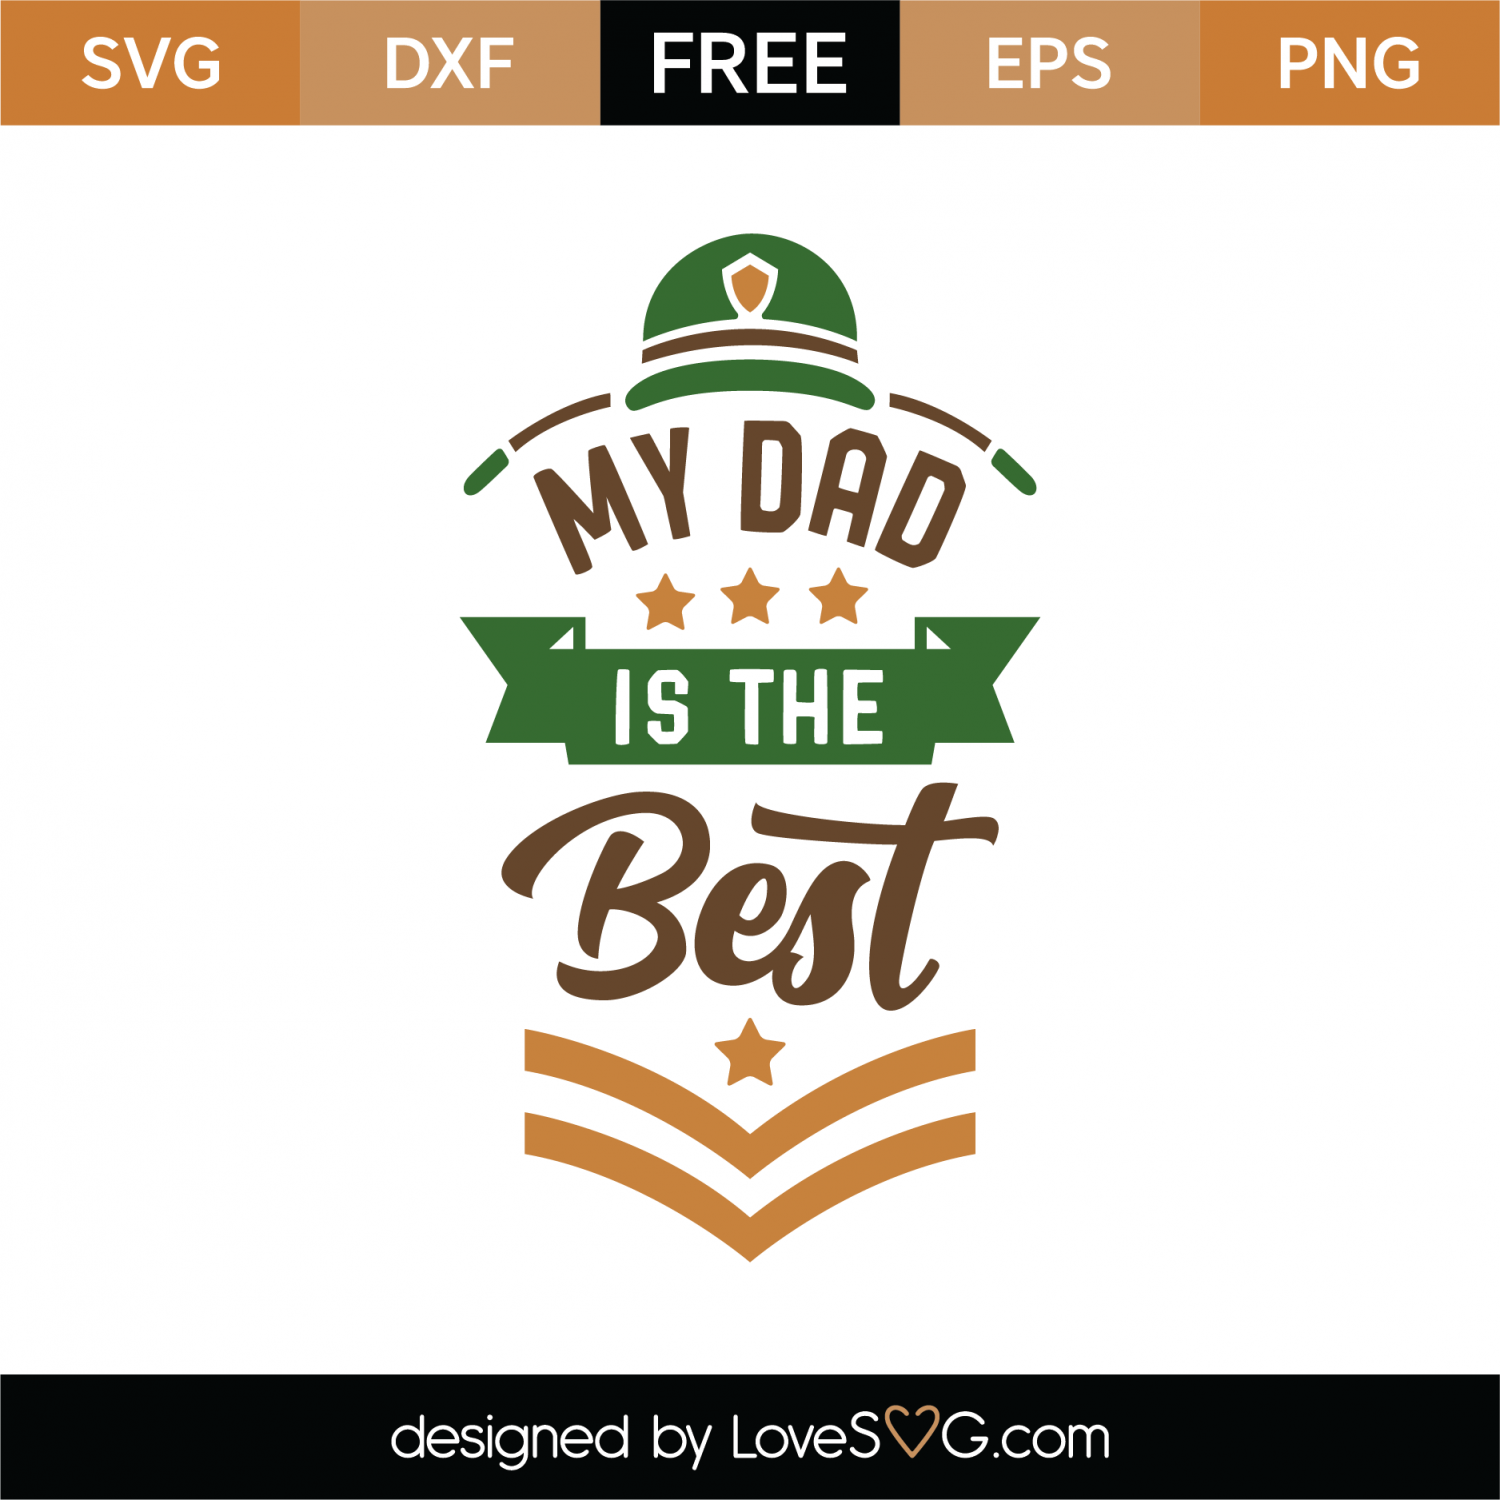 Free My Dad Is The Best SVG Cut File | Lovesvg.com